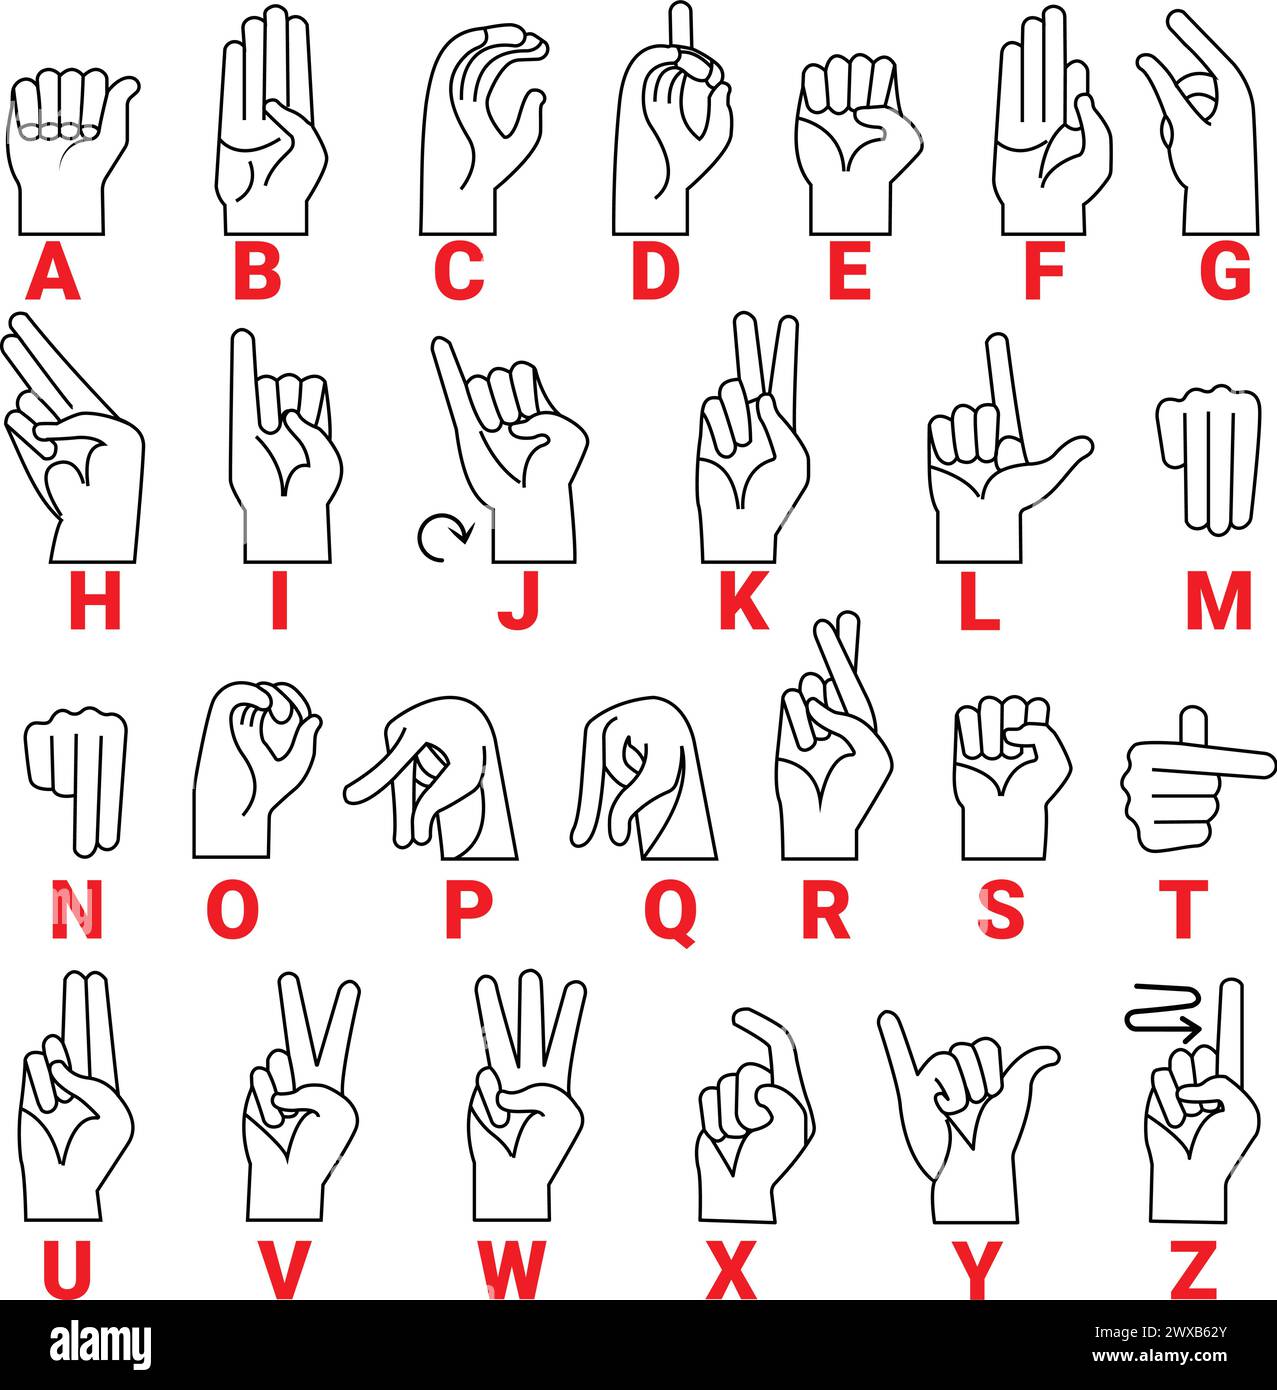 Deaf mute language. American deaf-mute hand gesture alphabet letters, ASL Alphabet American Sign Language numbers letters Stock Vector